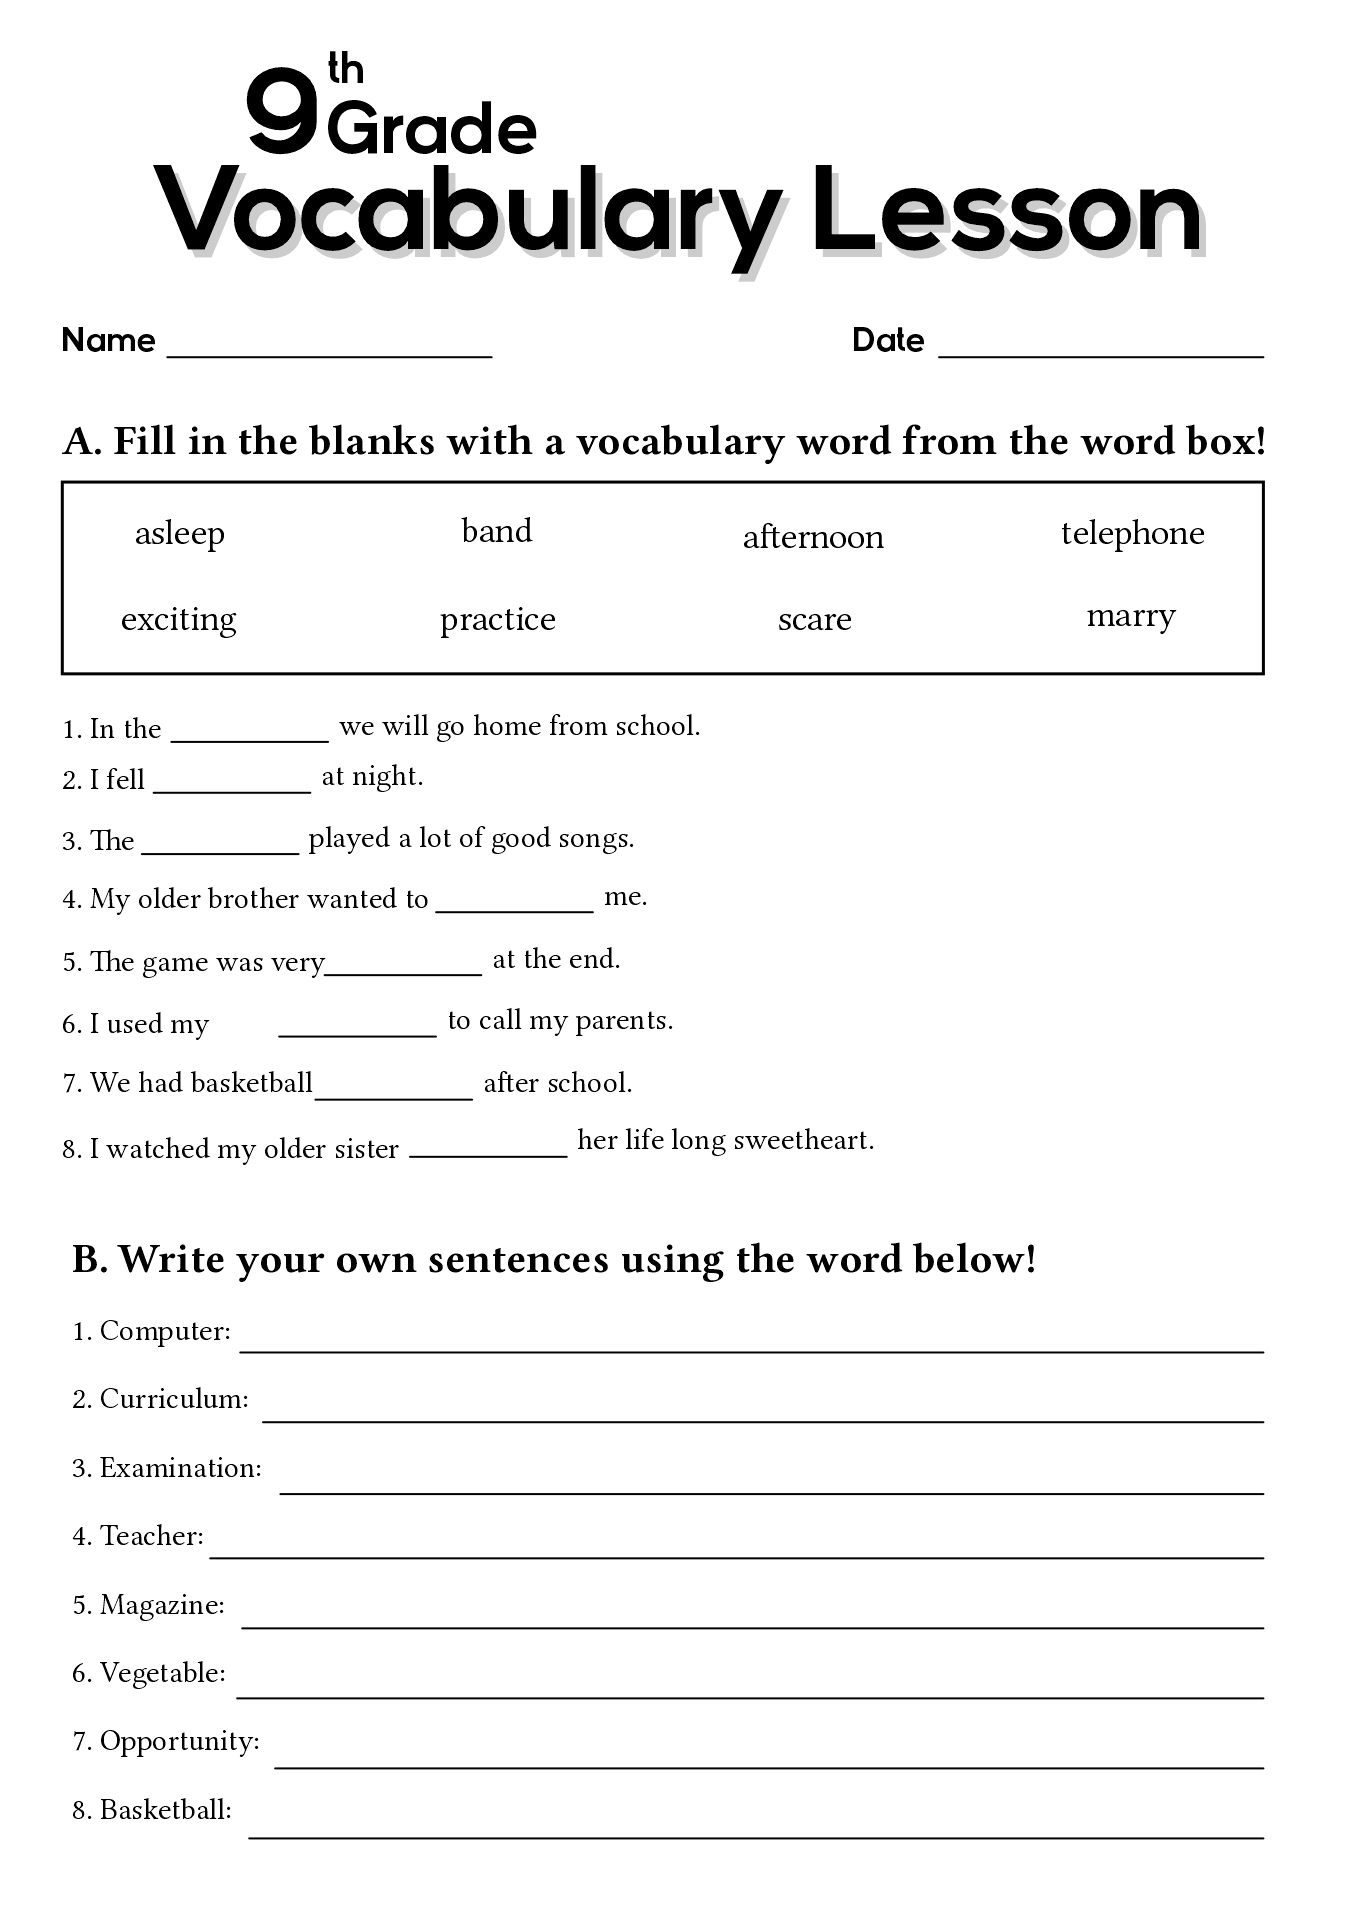 9th Grade Vocabulary Worksheets